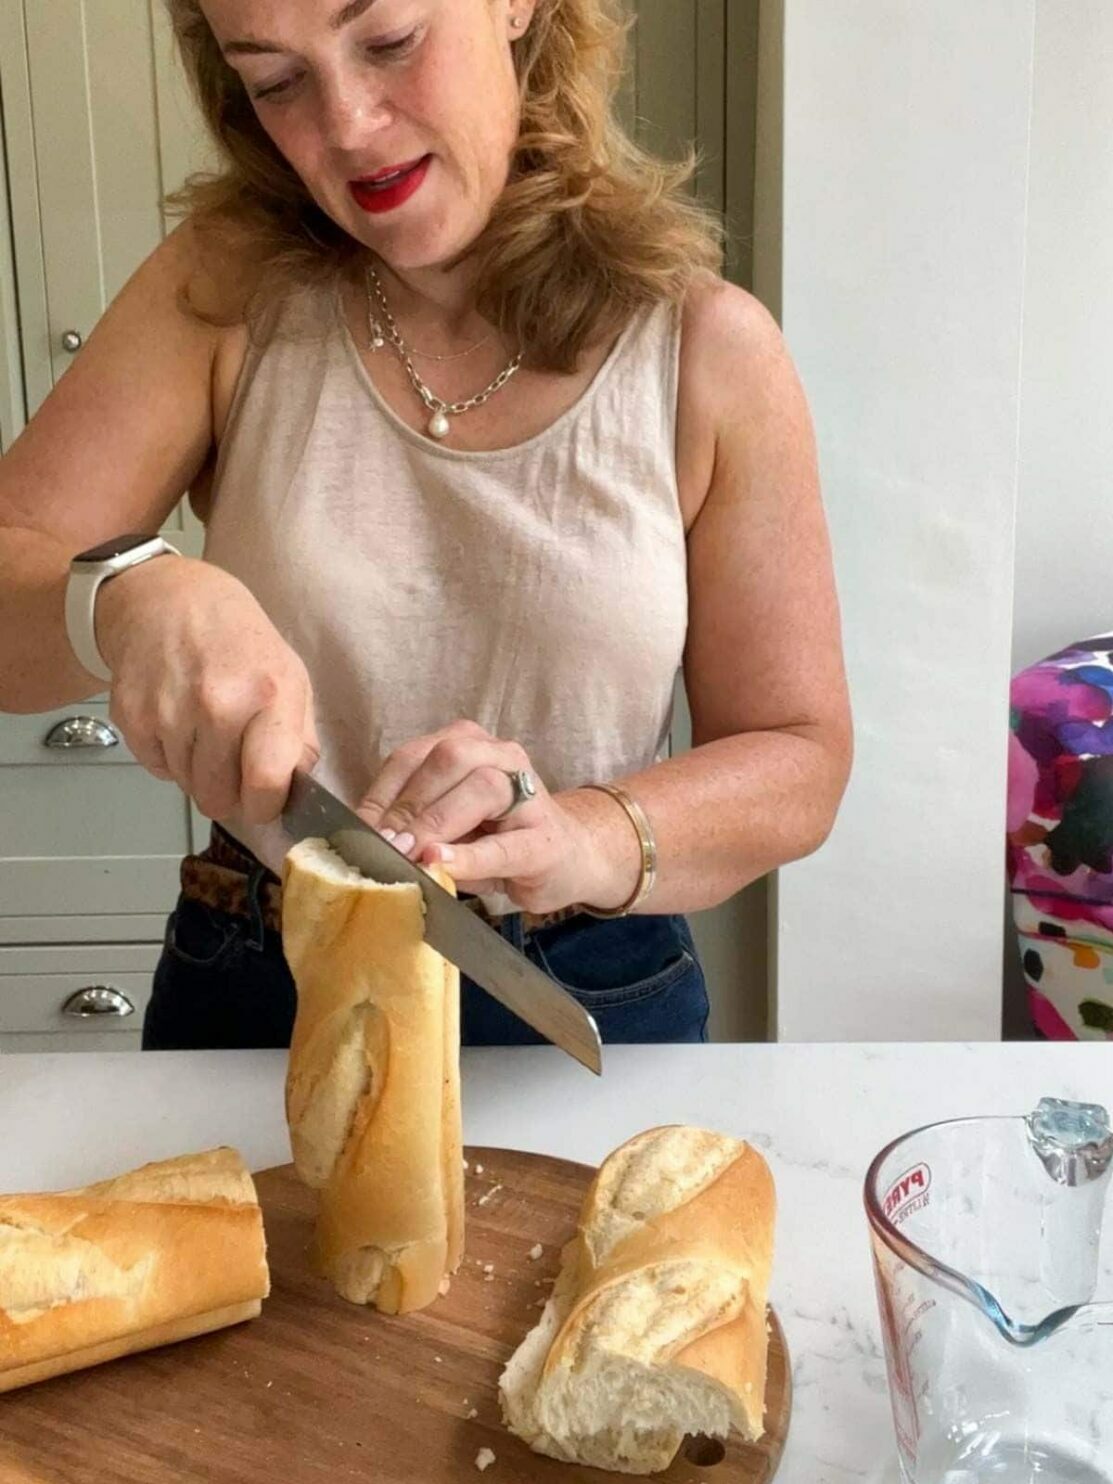 Sarah Rossi of Taming Twins demonstrating how to make french bread pizza step 1. Cutting the baguette lengthways in half.